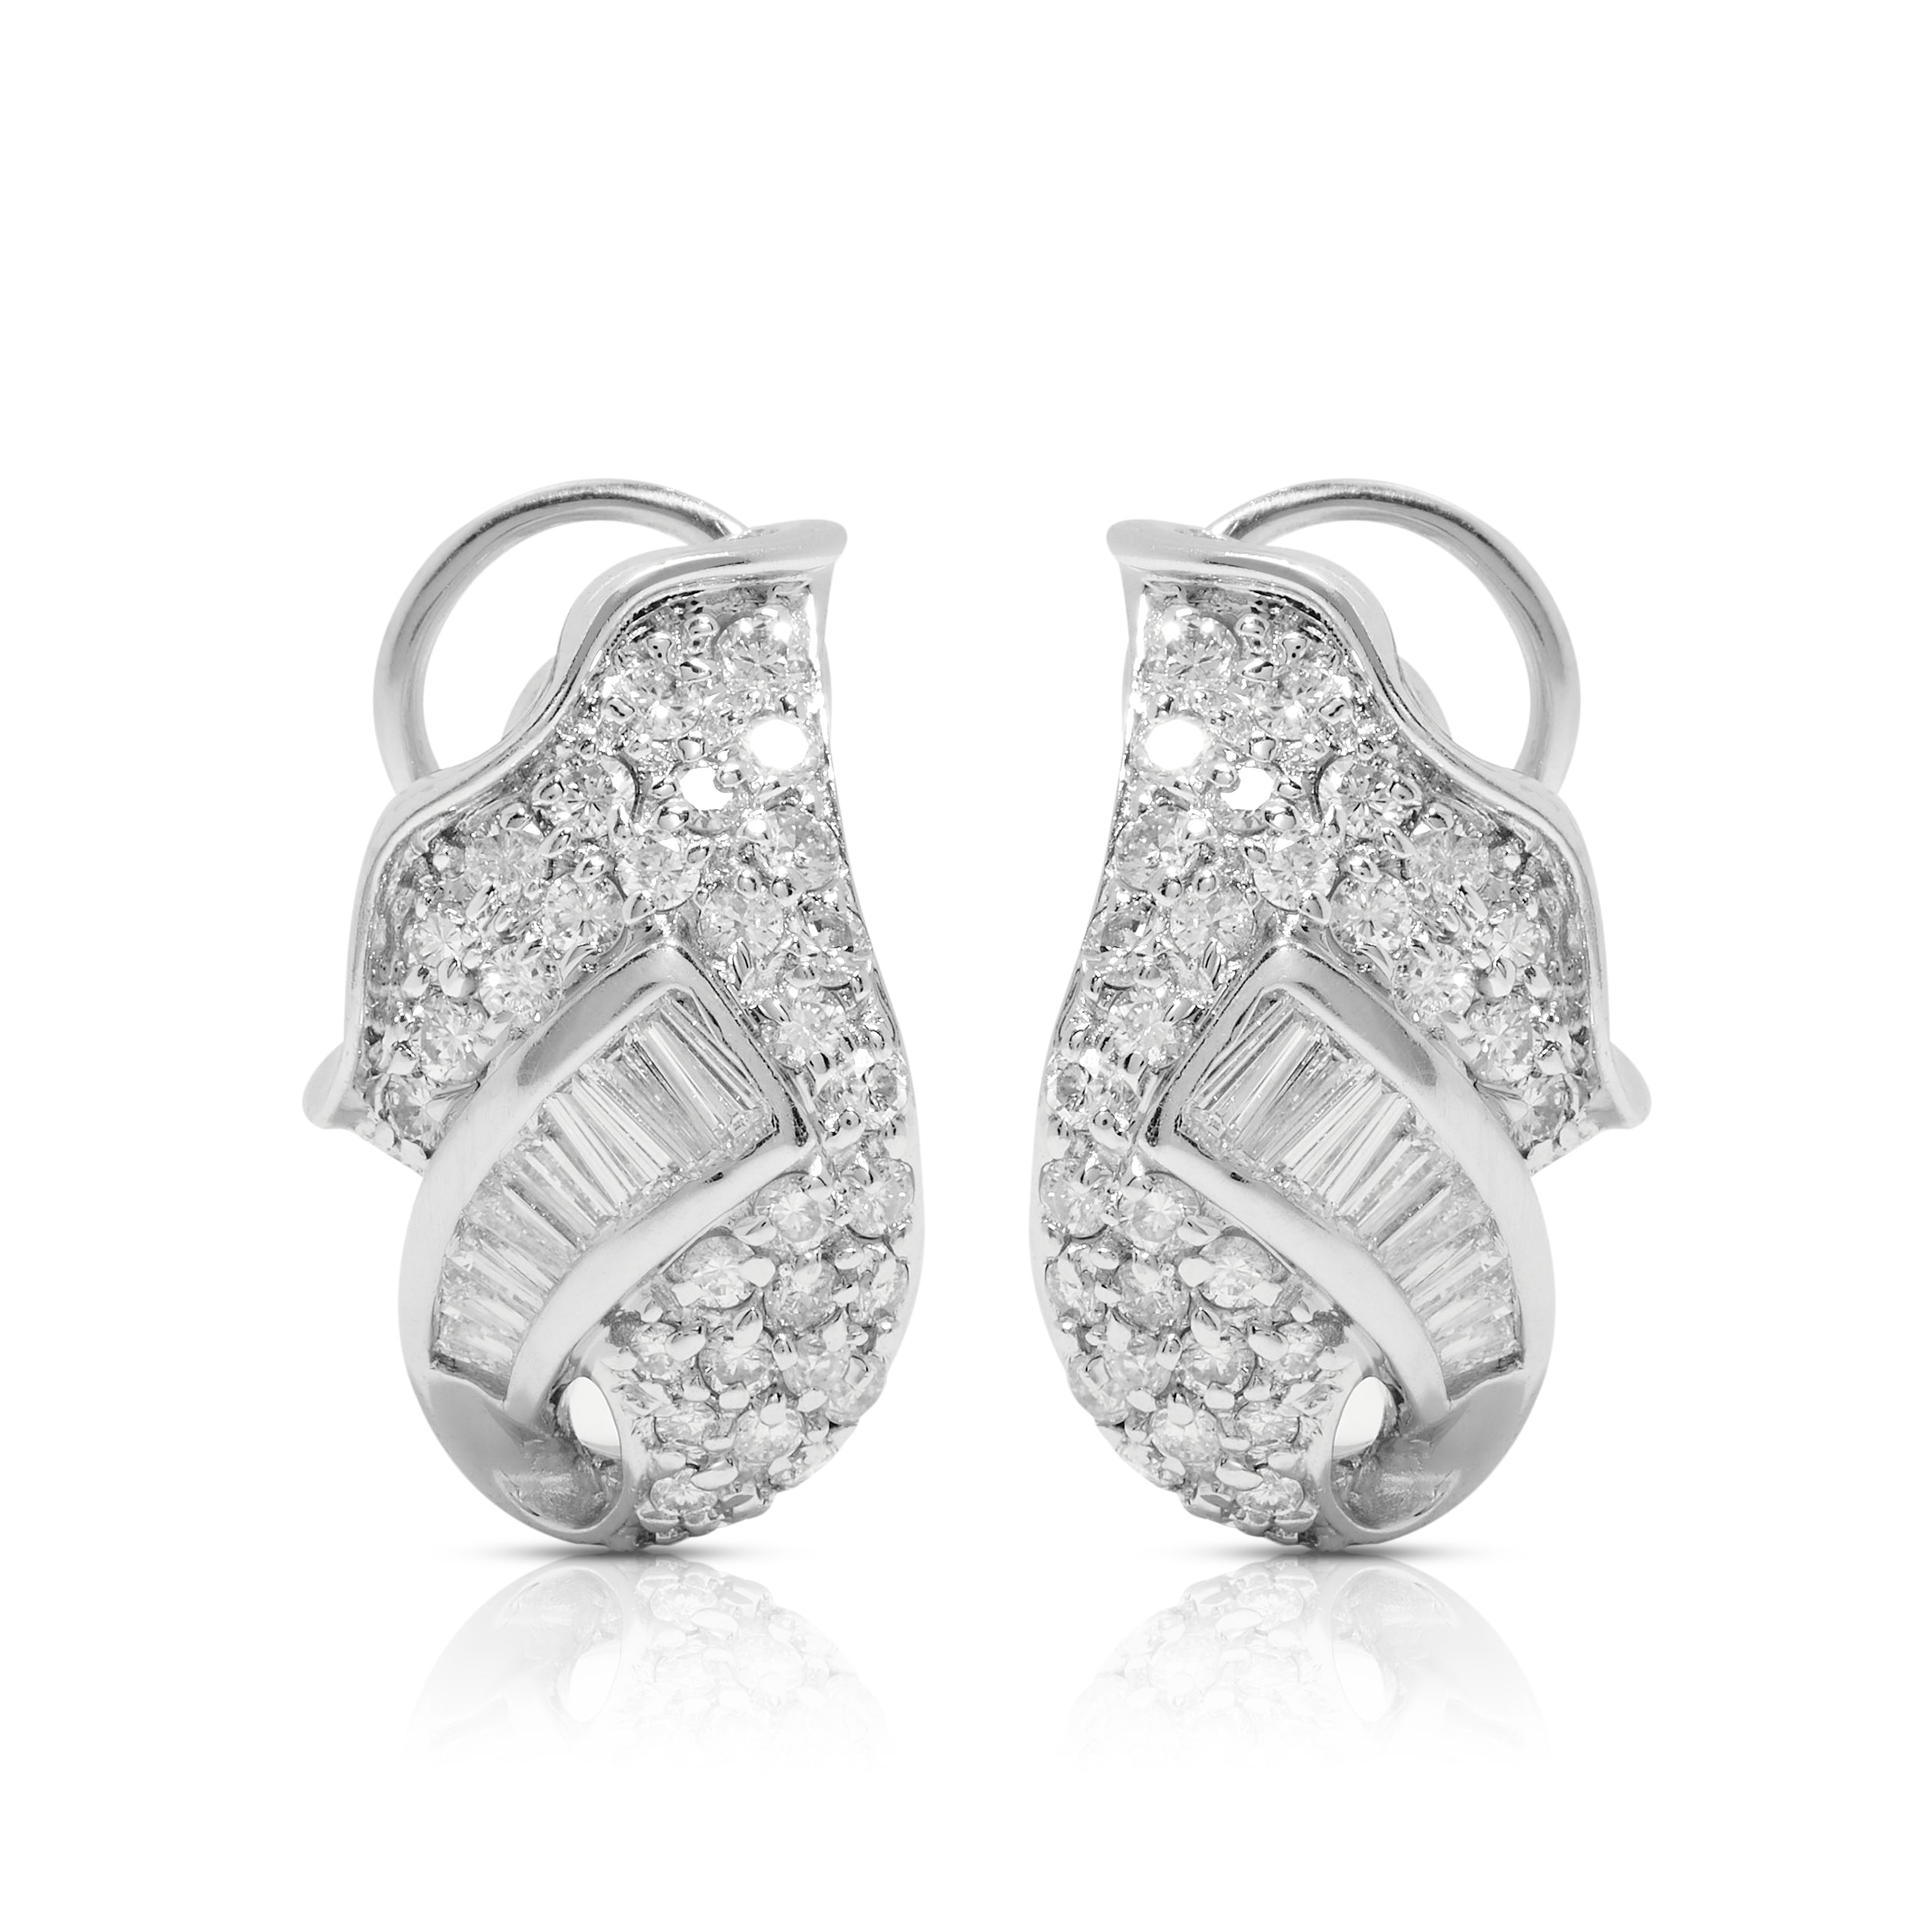 YazJewels Contemporary Angel Wing Earrings in 18ct White Gold with Pavé Diamonds